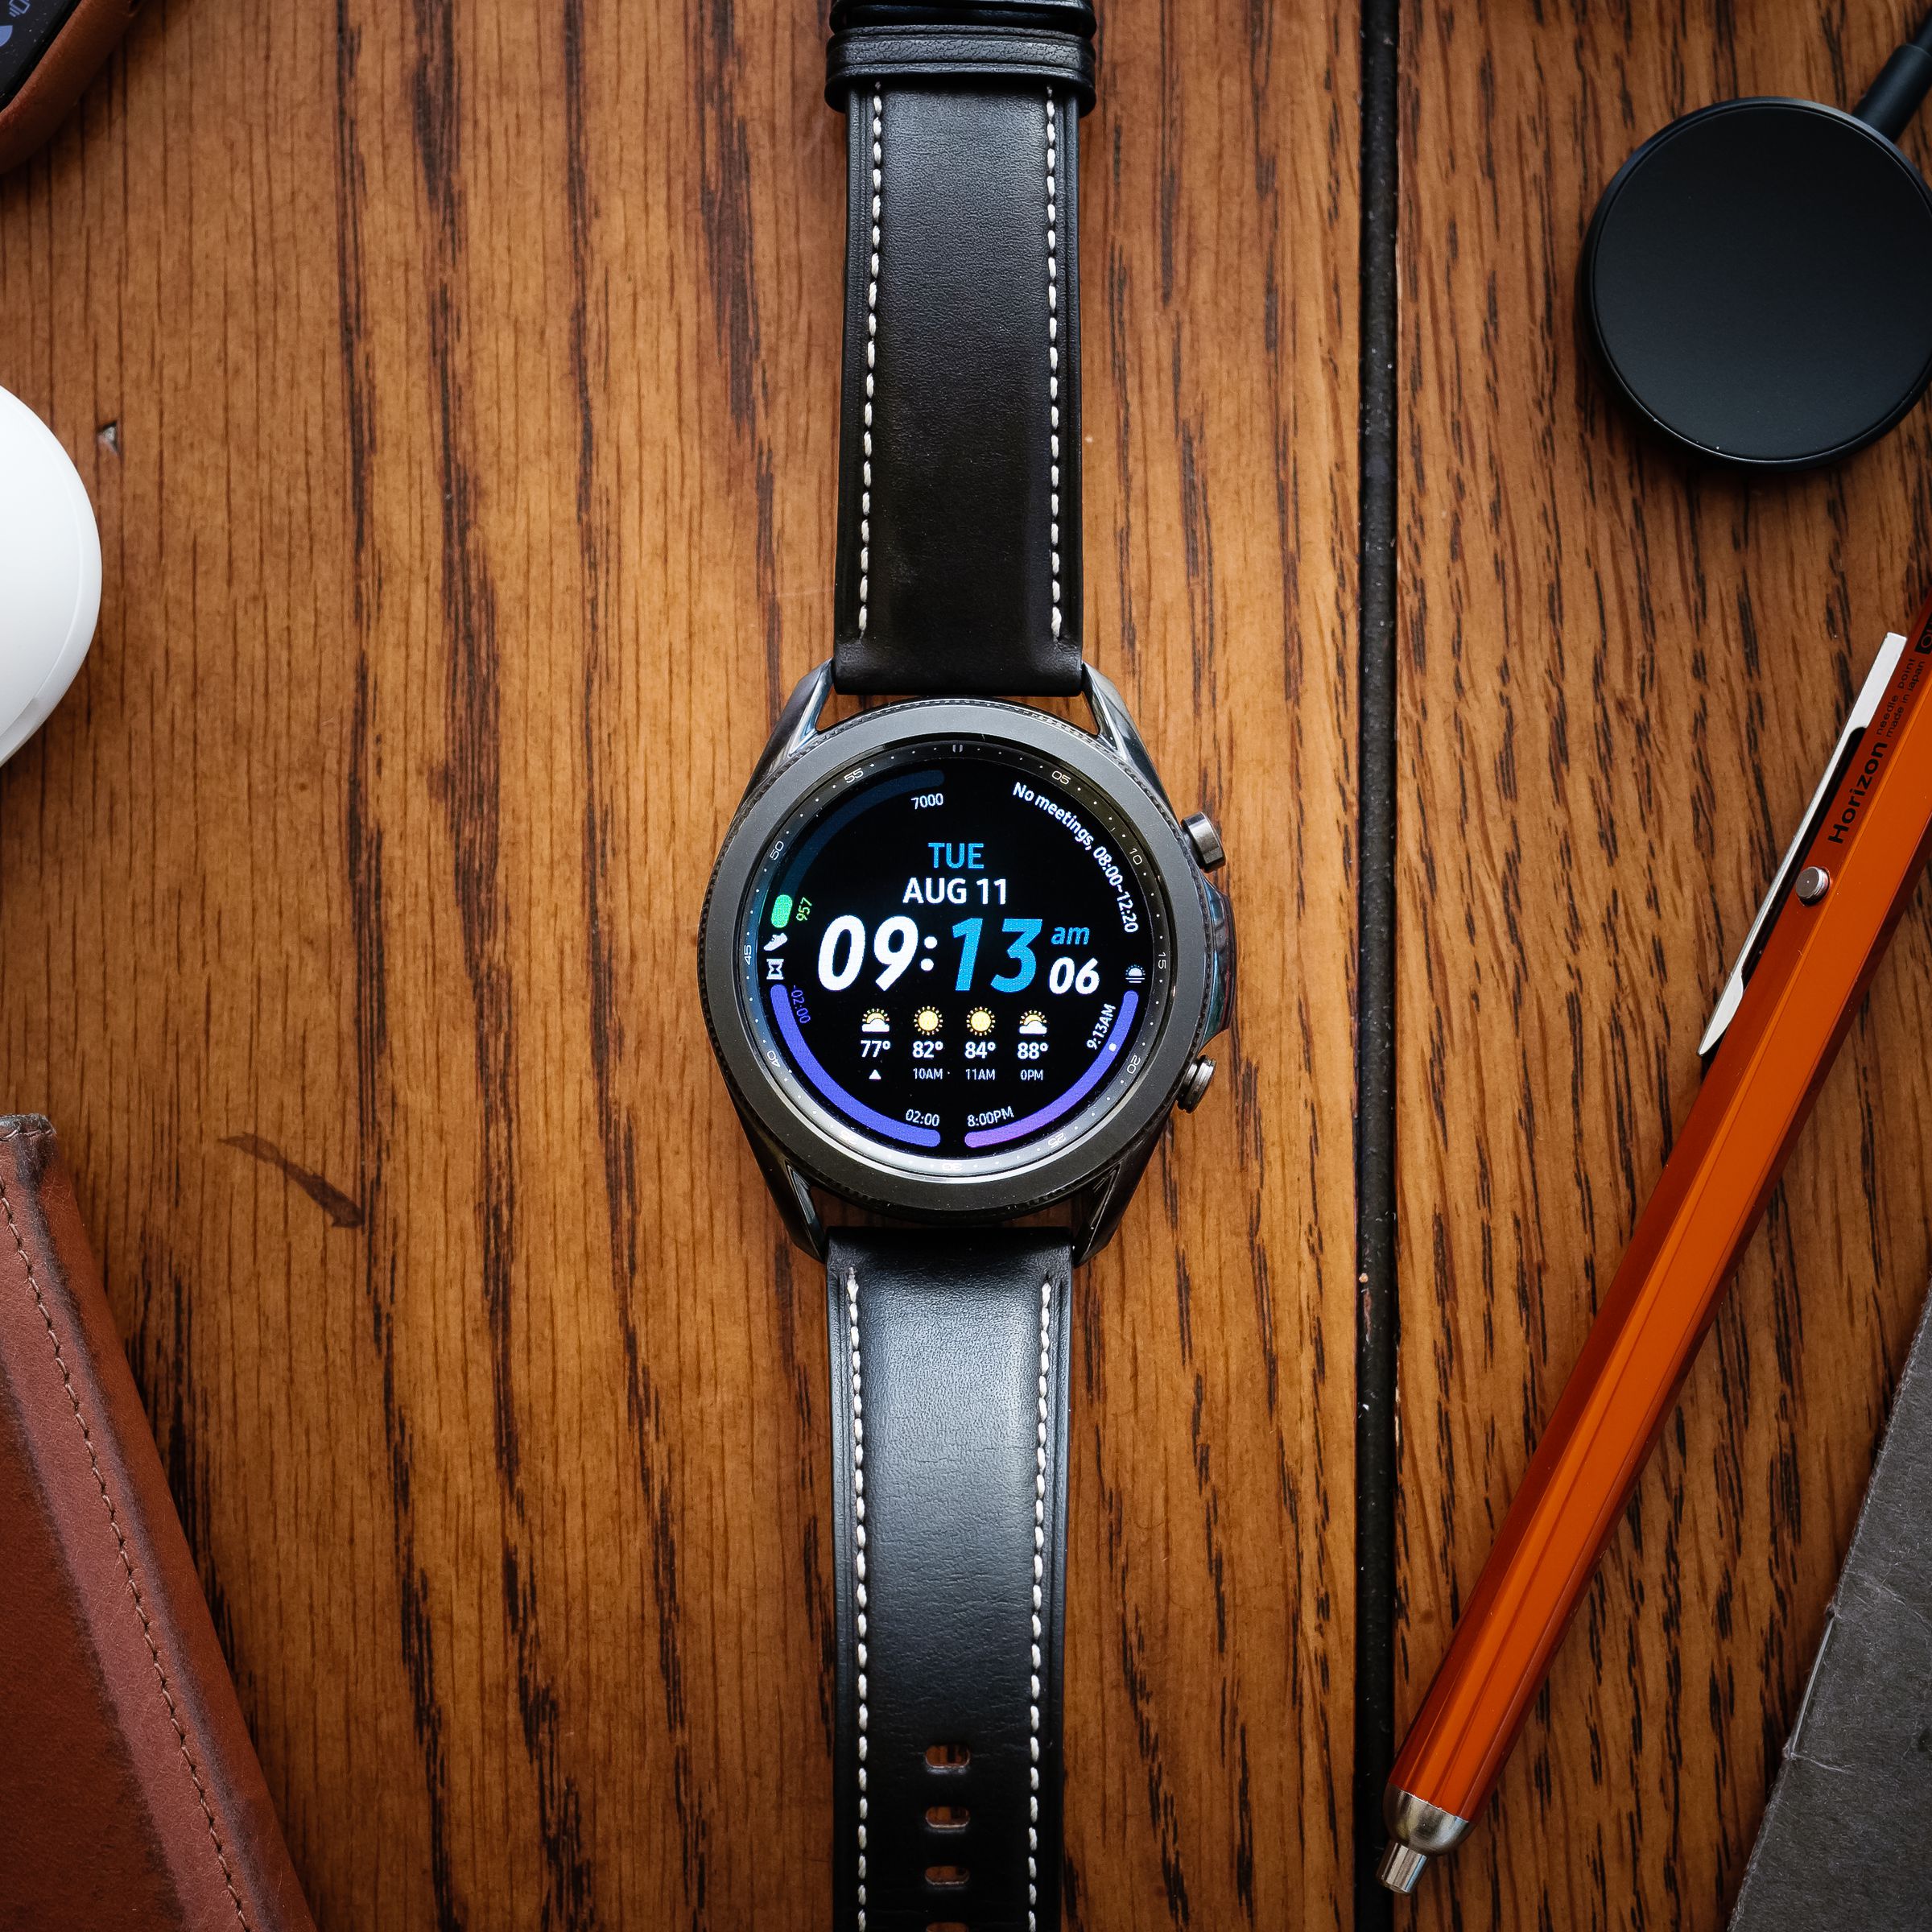 Samsung Galaxy Watch 3 review: small changes to a known formula - The Verge